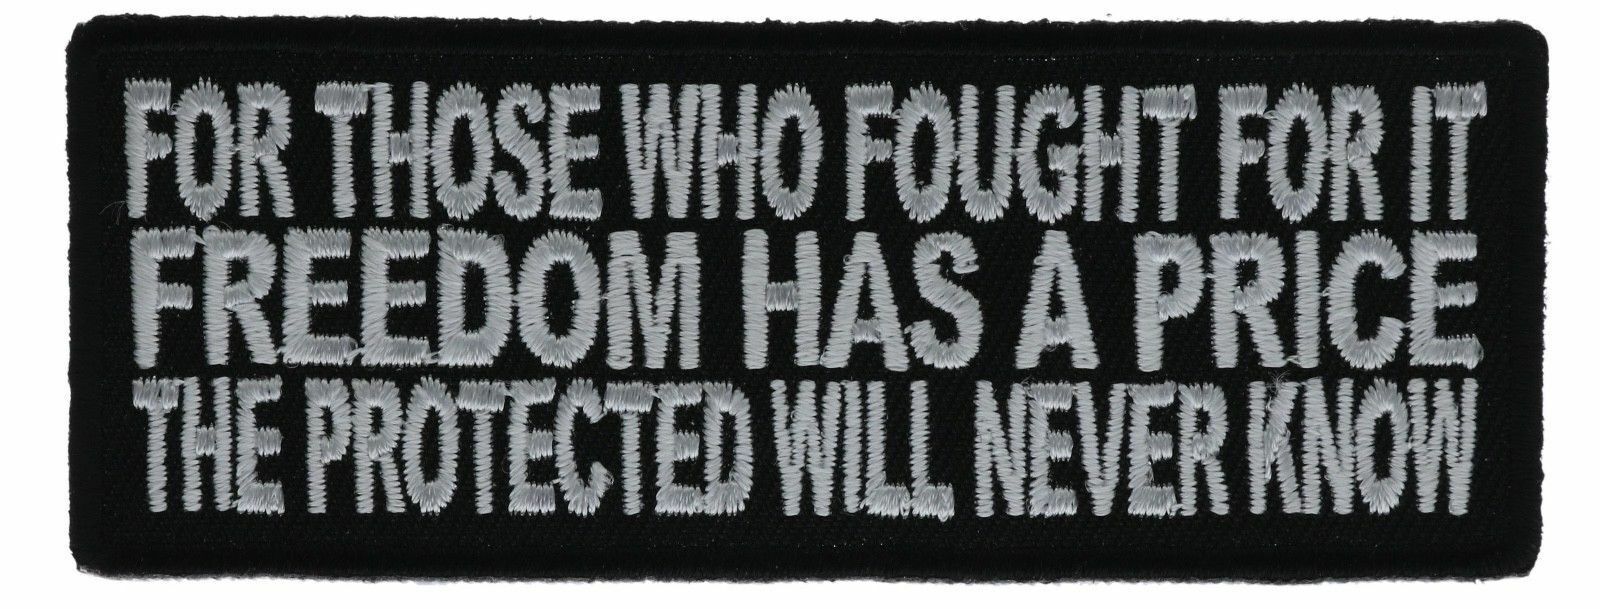 Freedom Has A Price Embroidered Patch IVAN3661 JF2D20D